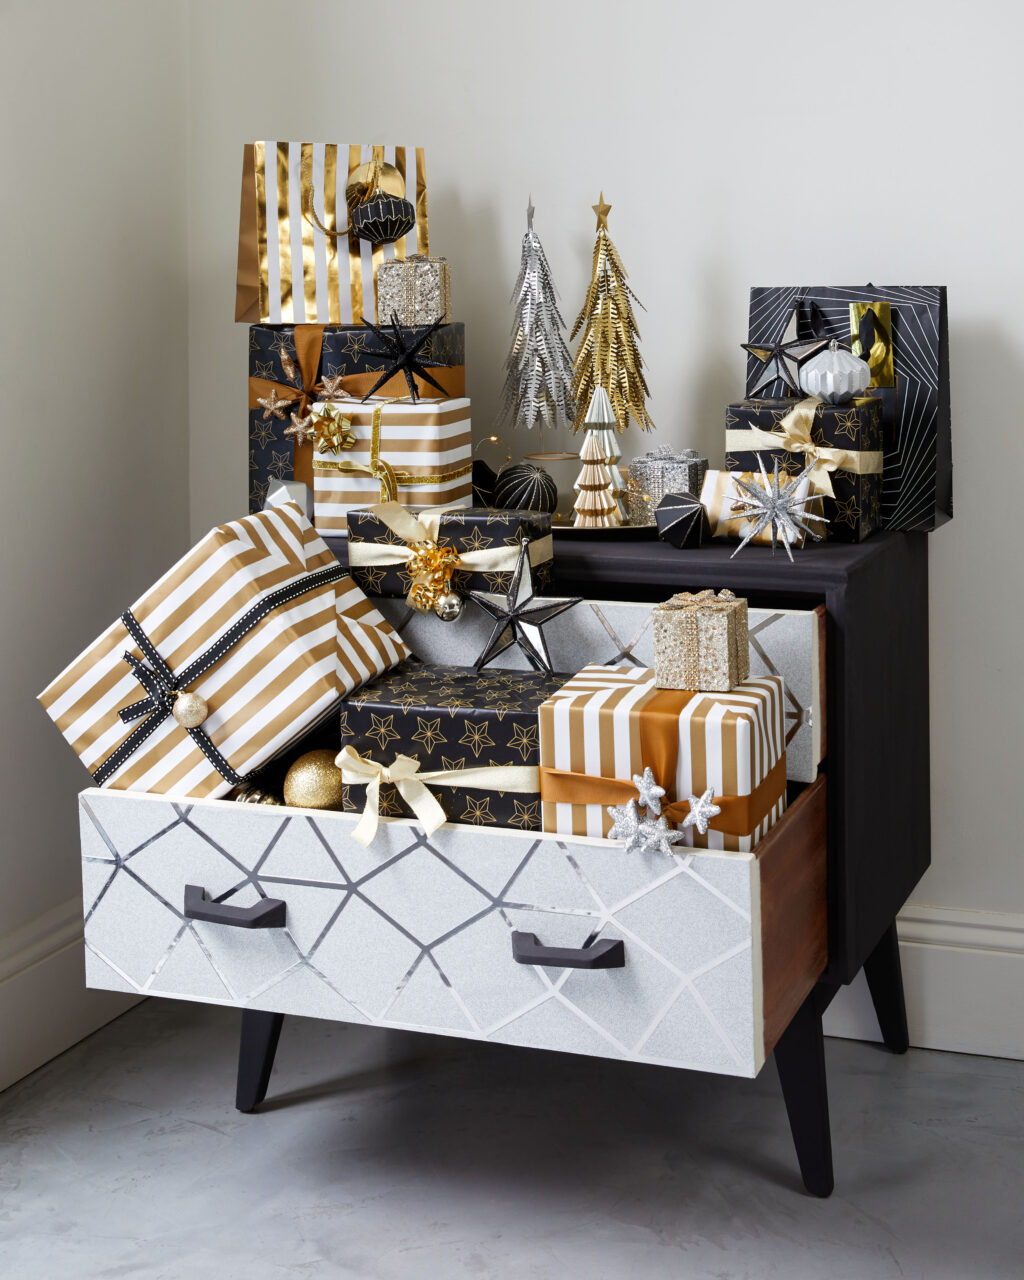 A chest of drawers with loads of Christmas gifts hidden inside 